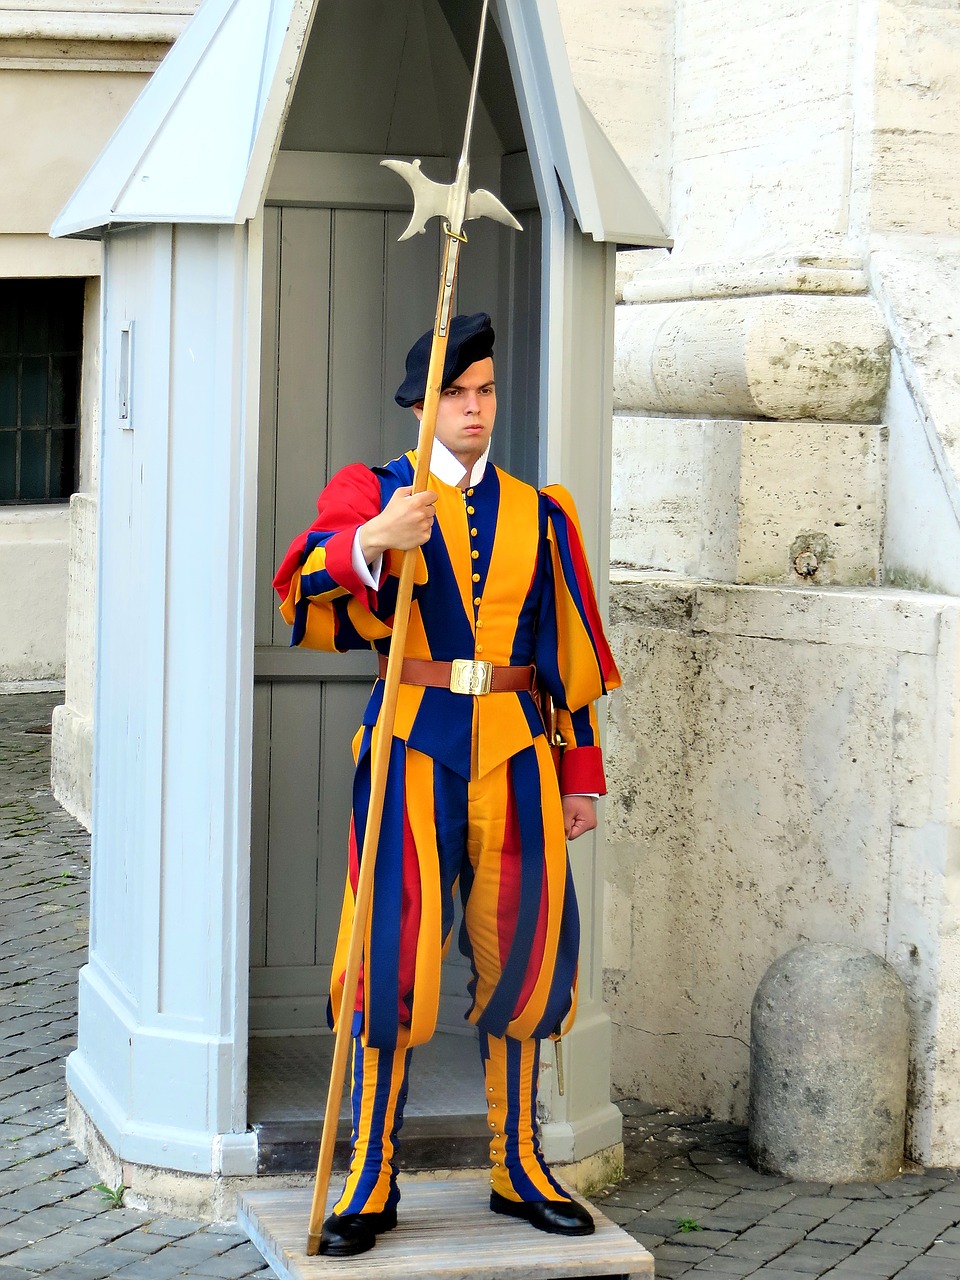 swiss guard vatican st peter's square free photo